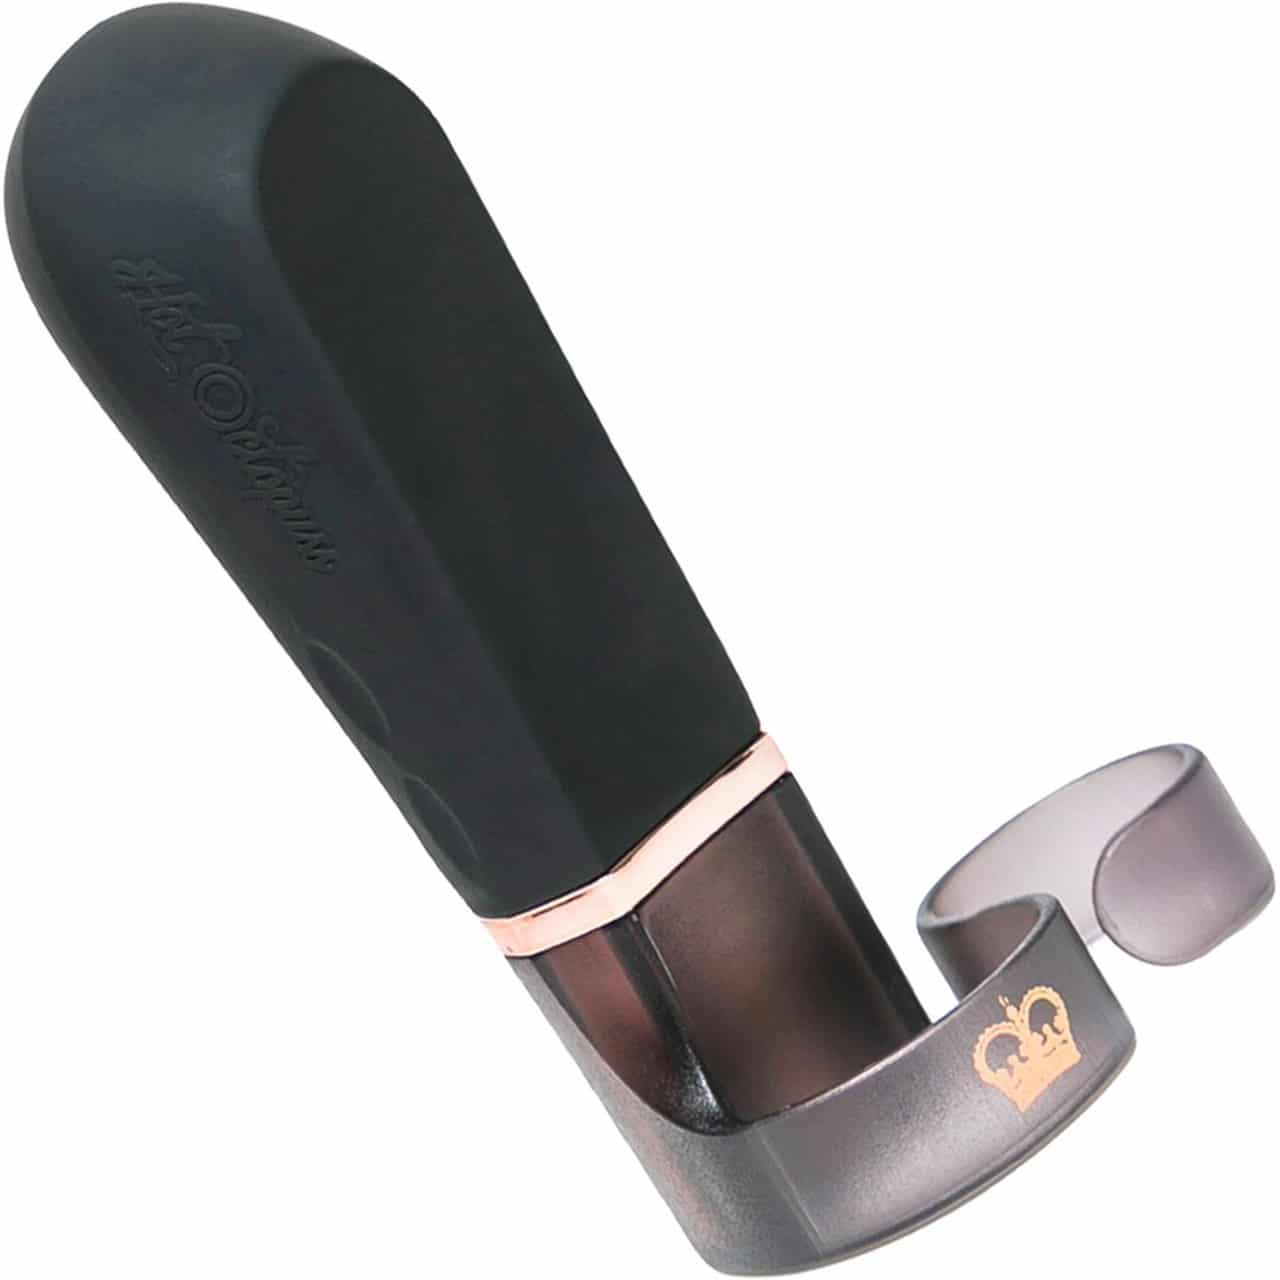 Product DiGiT Powerful Silicone Finger Vibrator